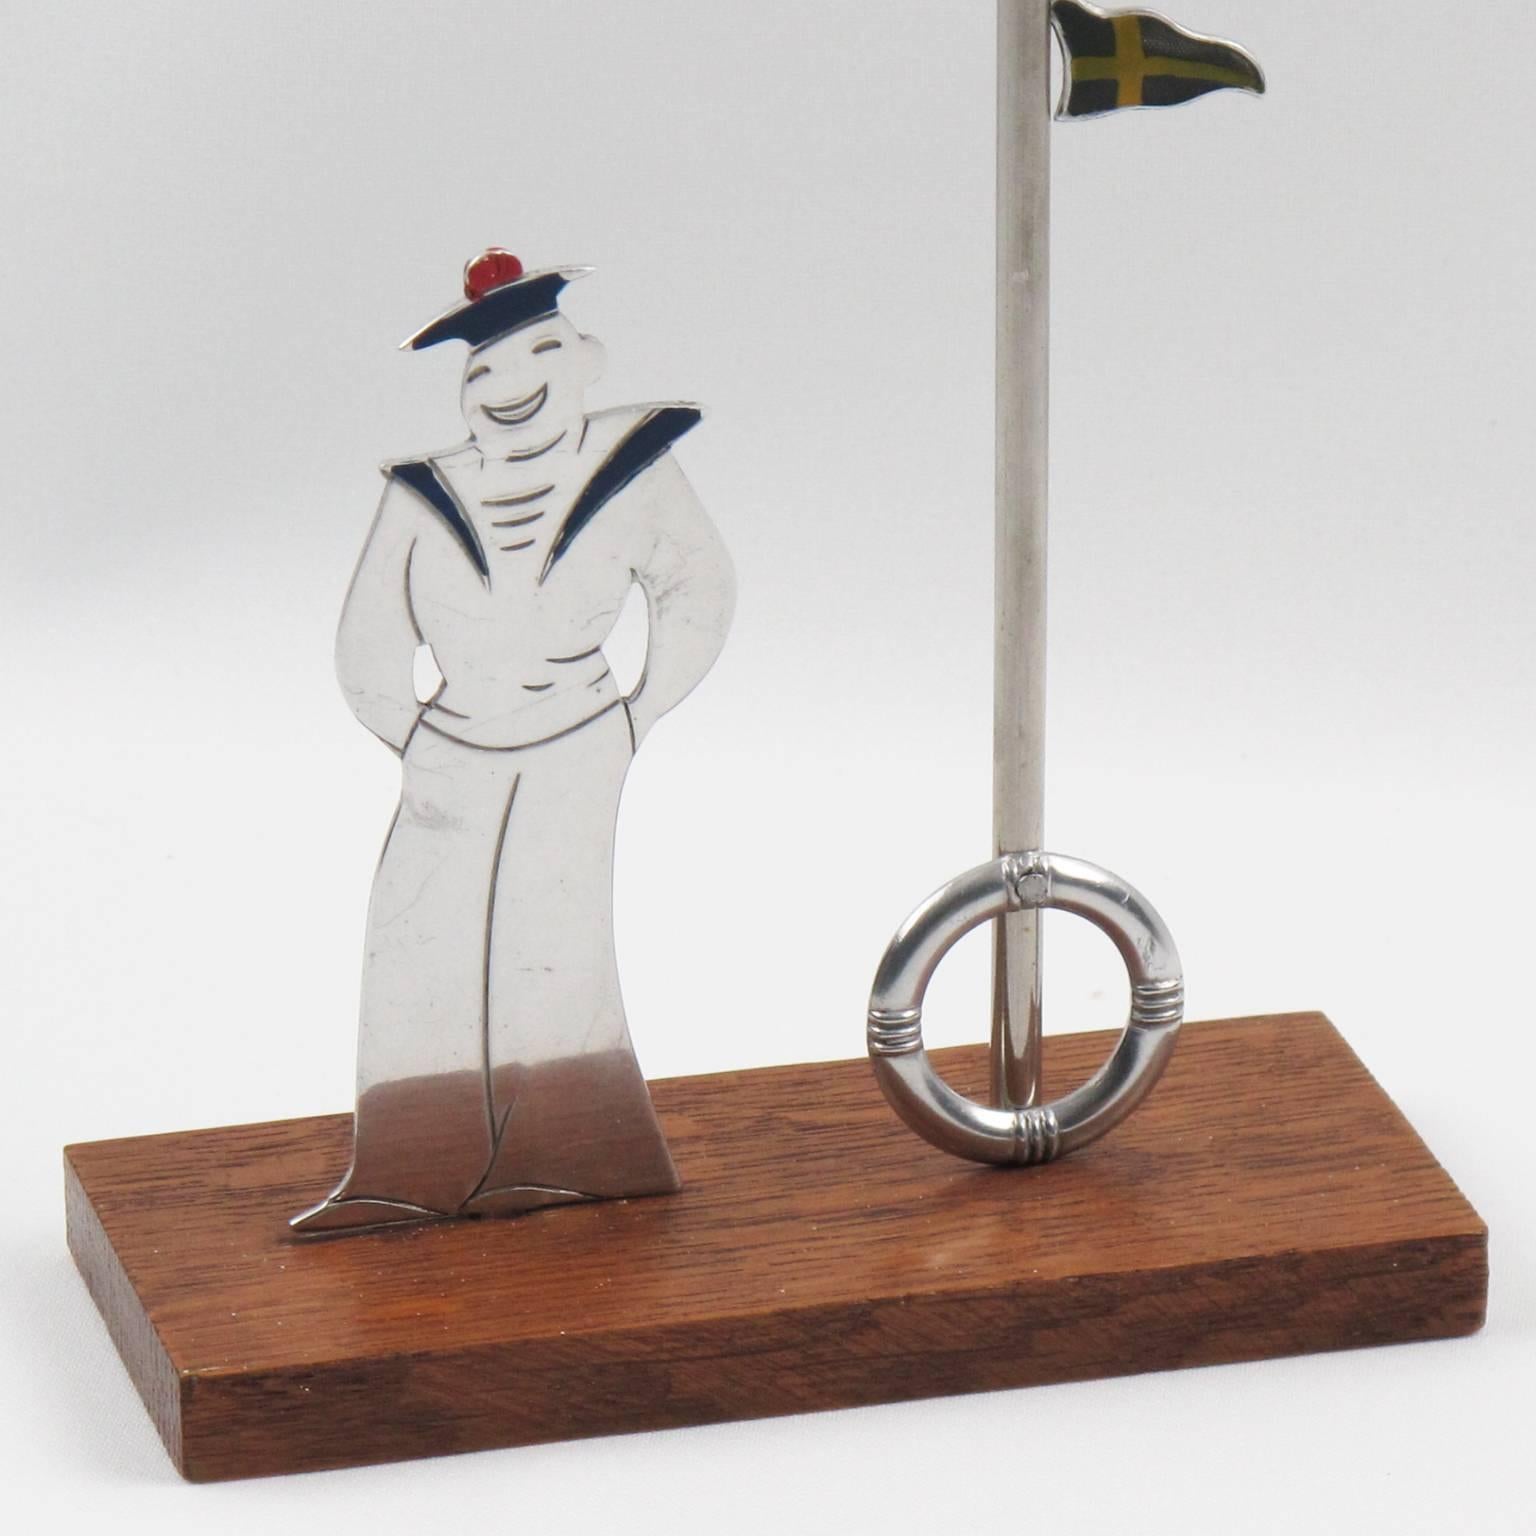 Rare stunning French Art Deco barware accessory glass markers for cocktail and party by Sudre, circa 1930s. Featuring an aluminum silhouette shape of a French Navy sailor with enameling details and a huge pole holder. Pole holder is in aluminum with